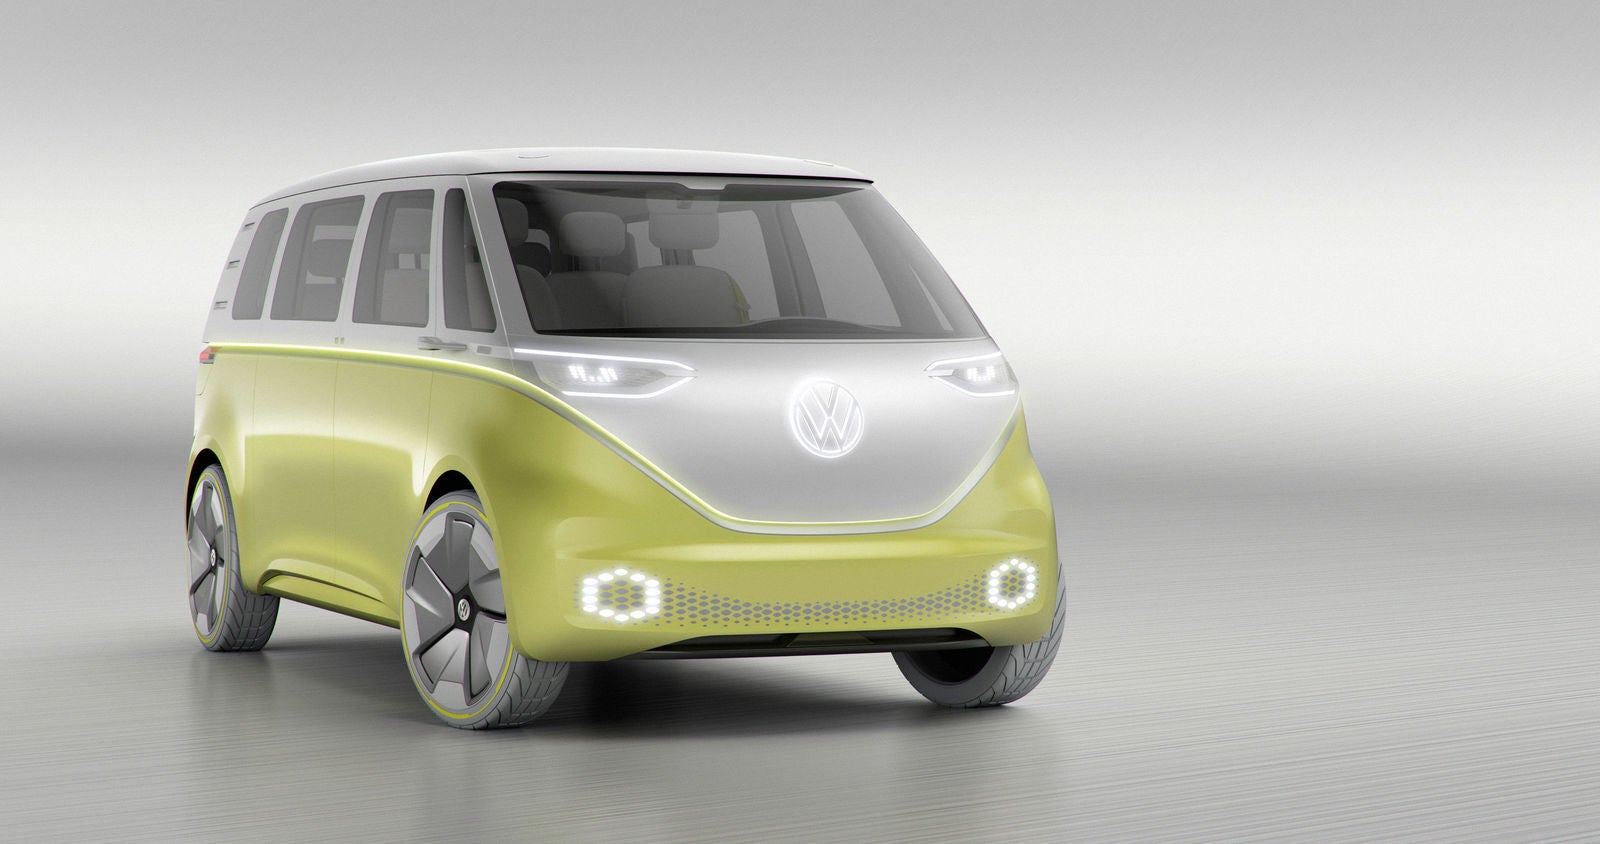 At one point, the Apple Car would have looked like the 2017 VW ID Buzz prototype - The Apple Car could have changed the face of the automotive industry